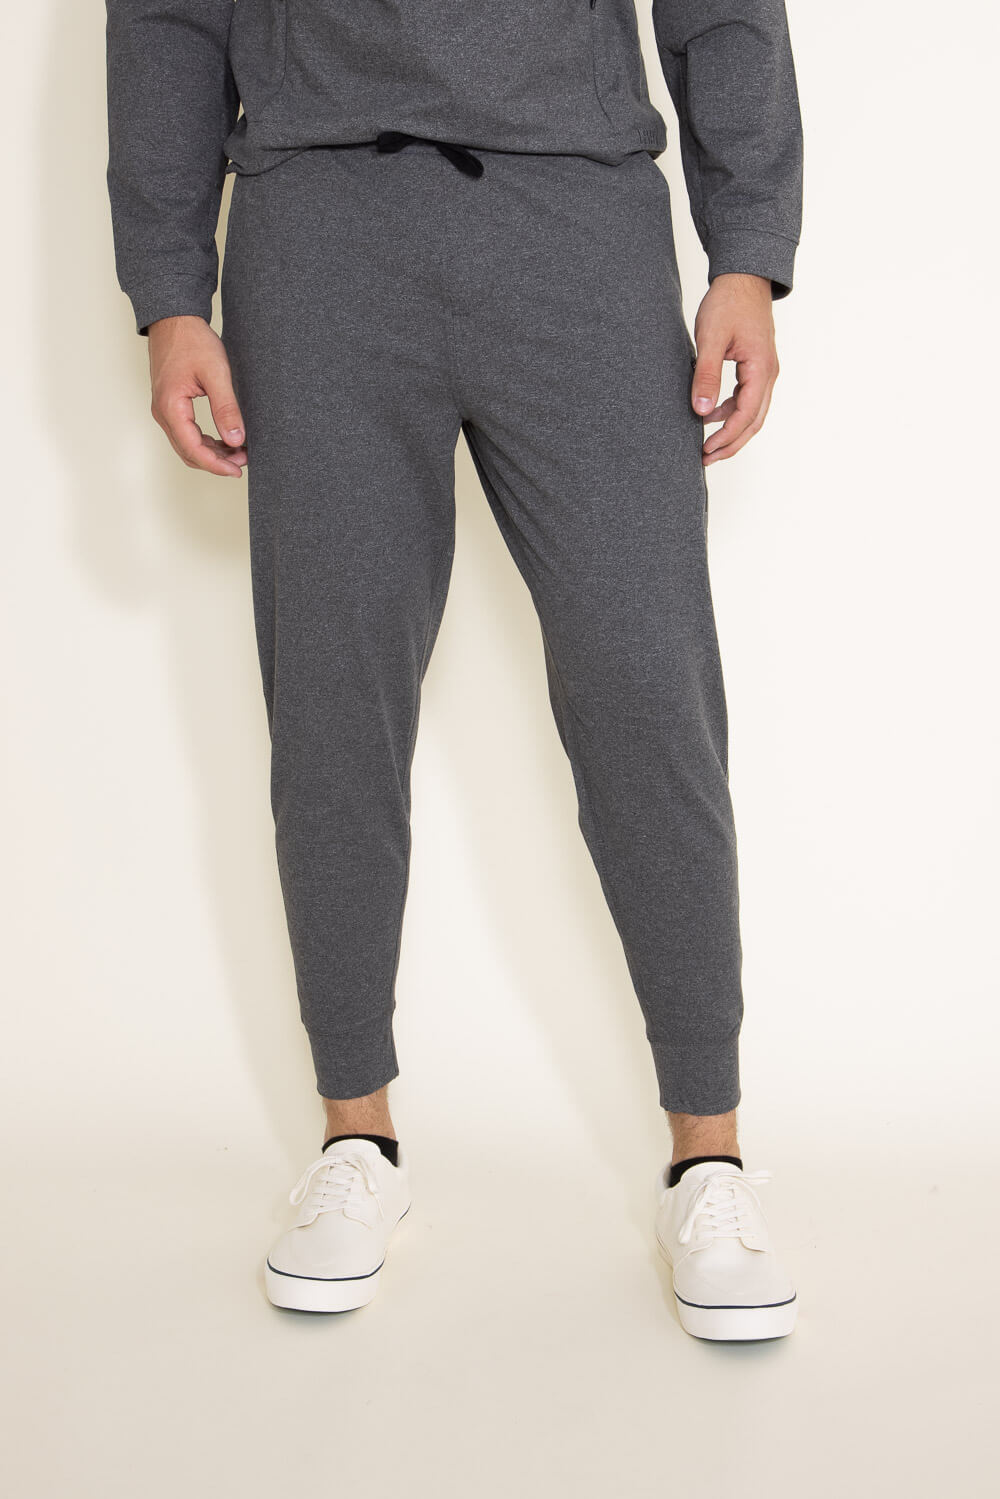 1897 Active Diamond Stretch Joggers for Men in Grey